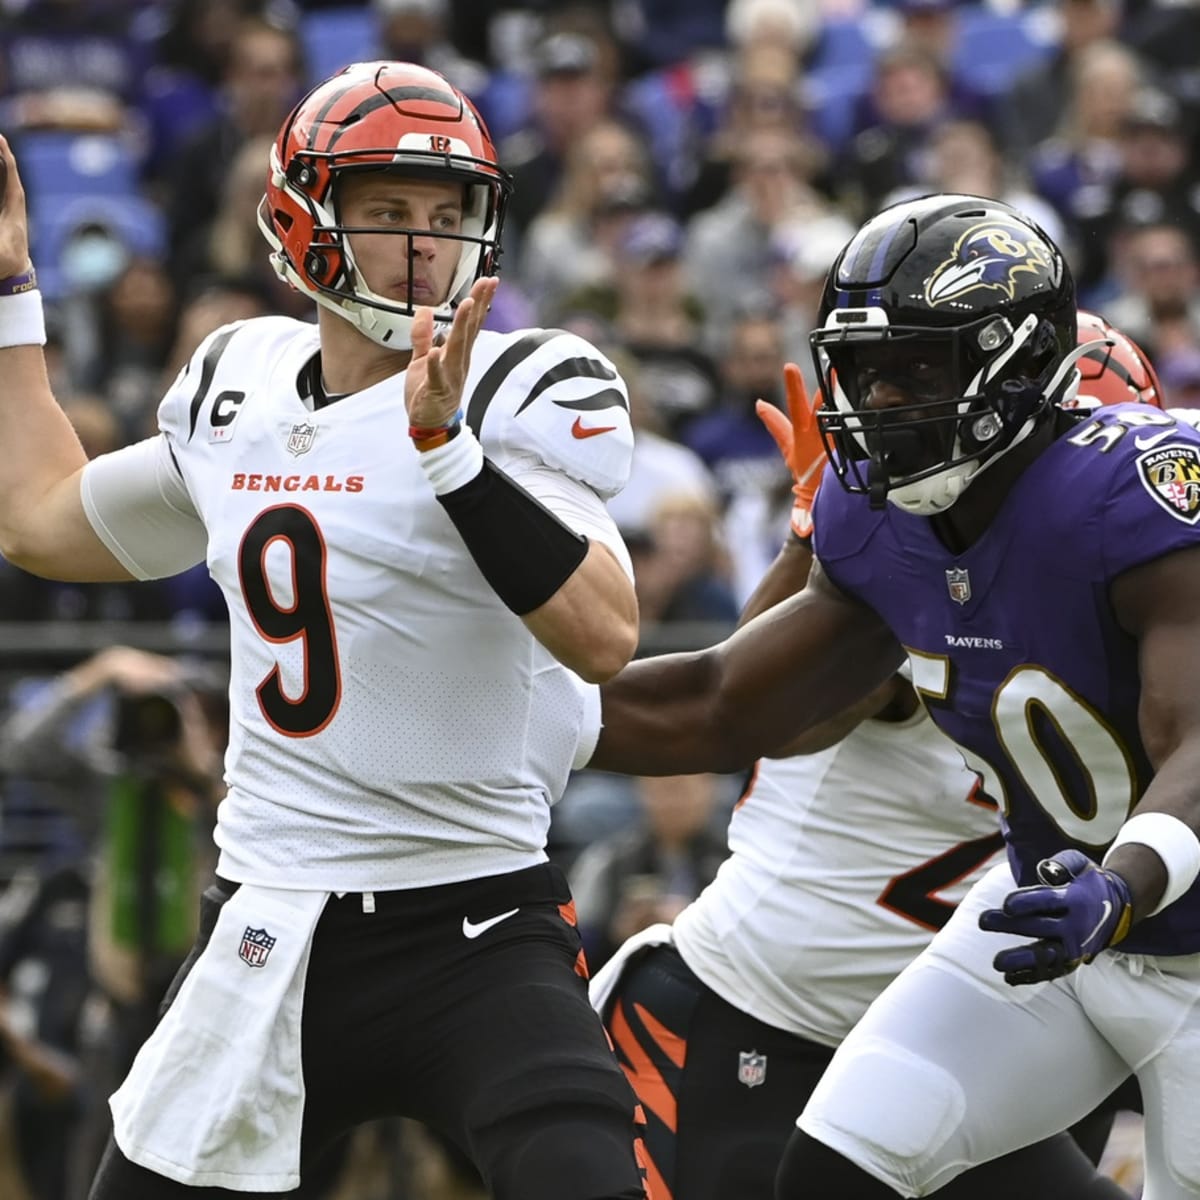 How to watch Bengals vs. Ravens on Sunday Night Football